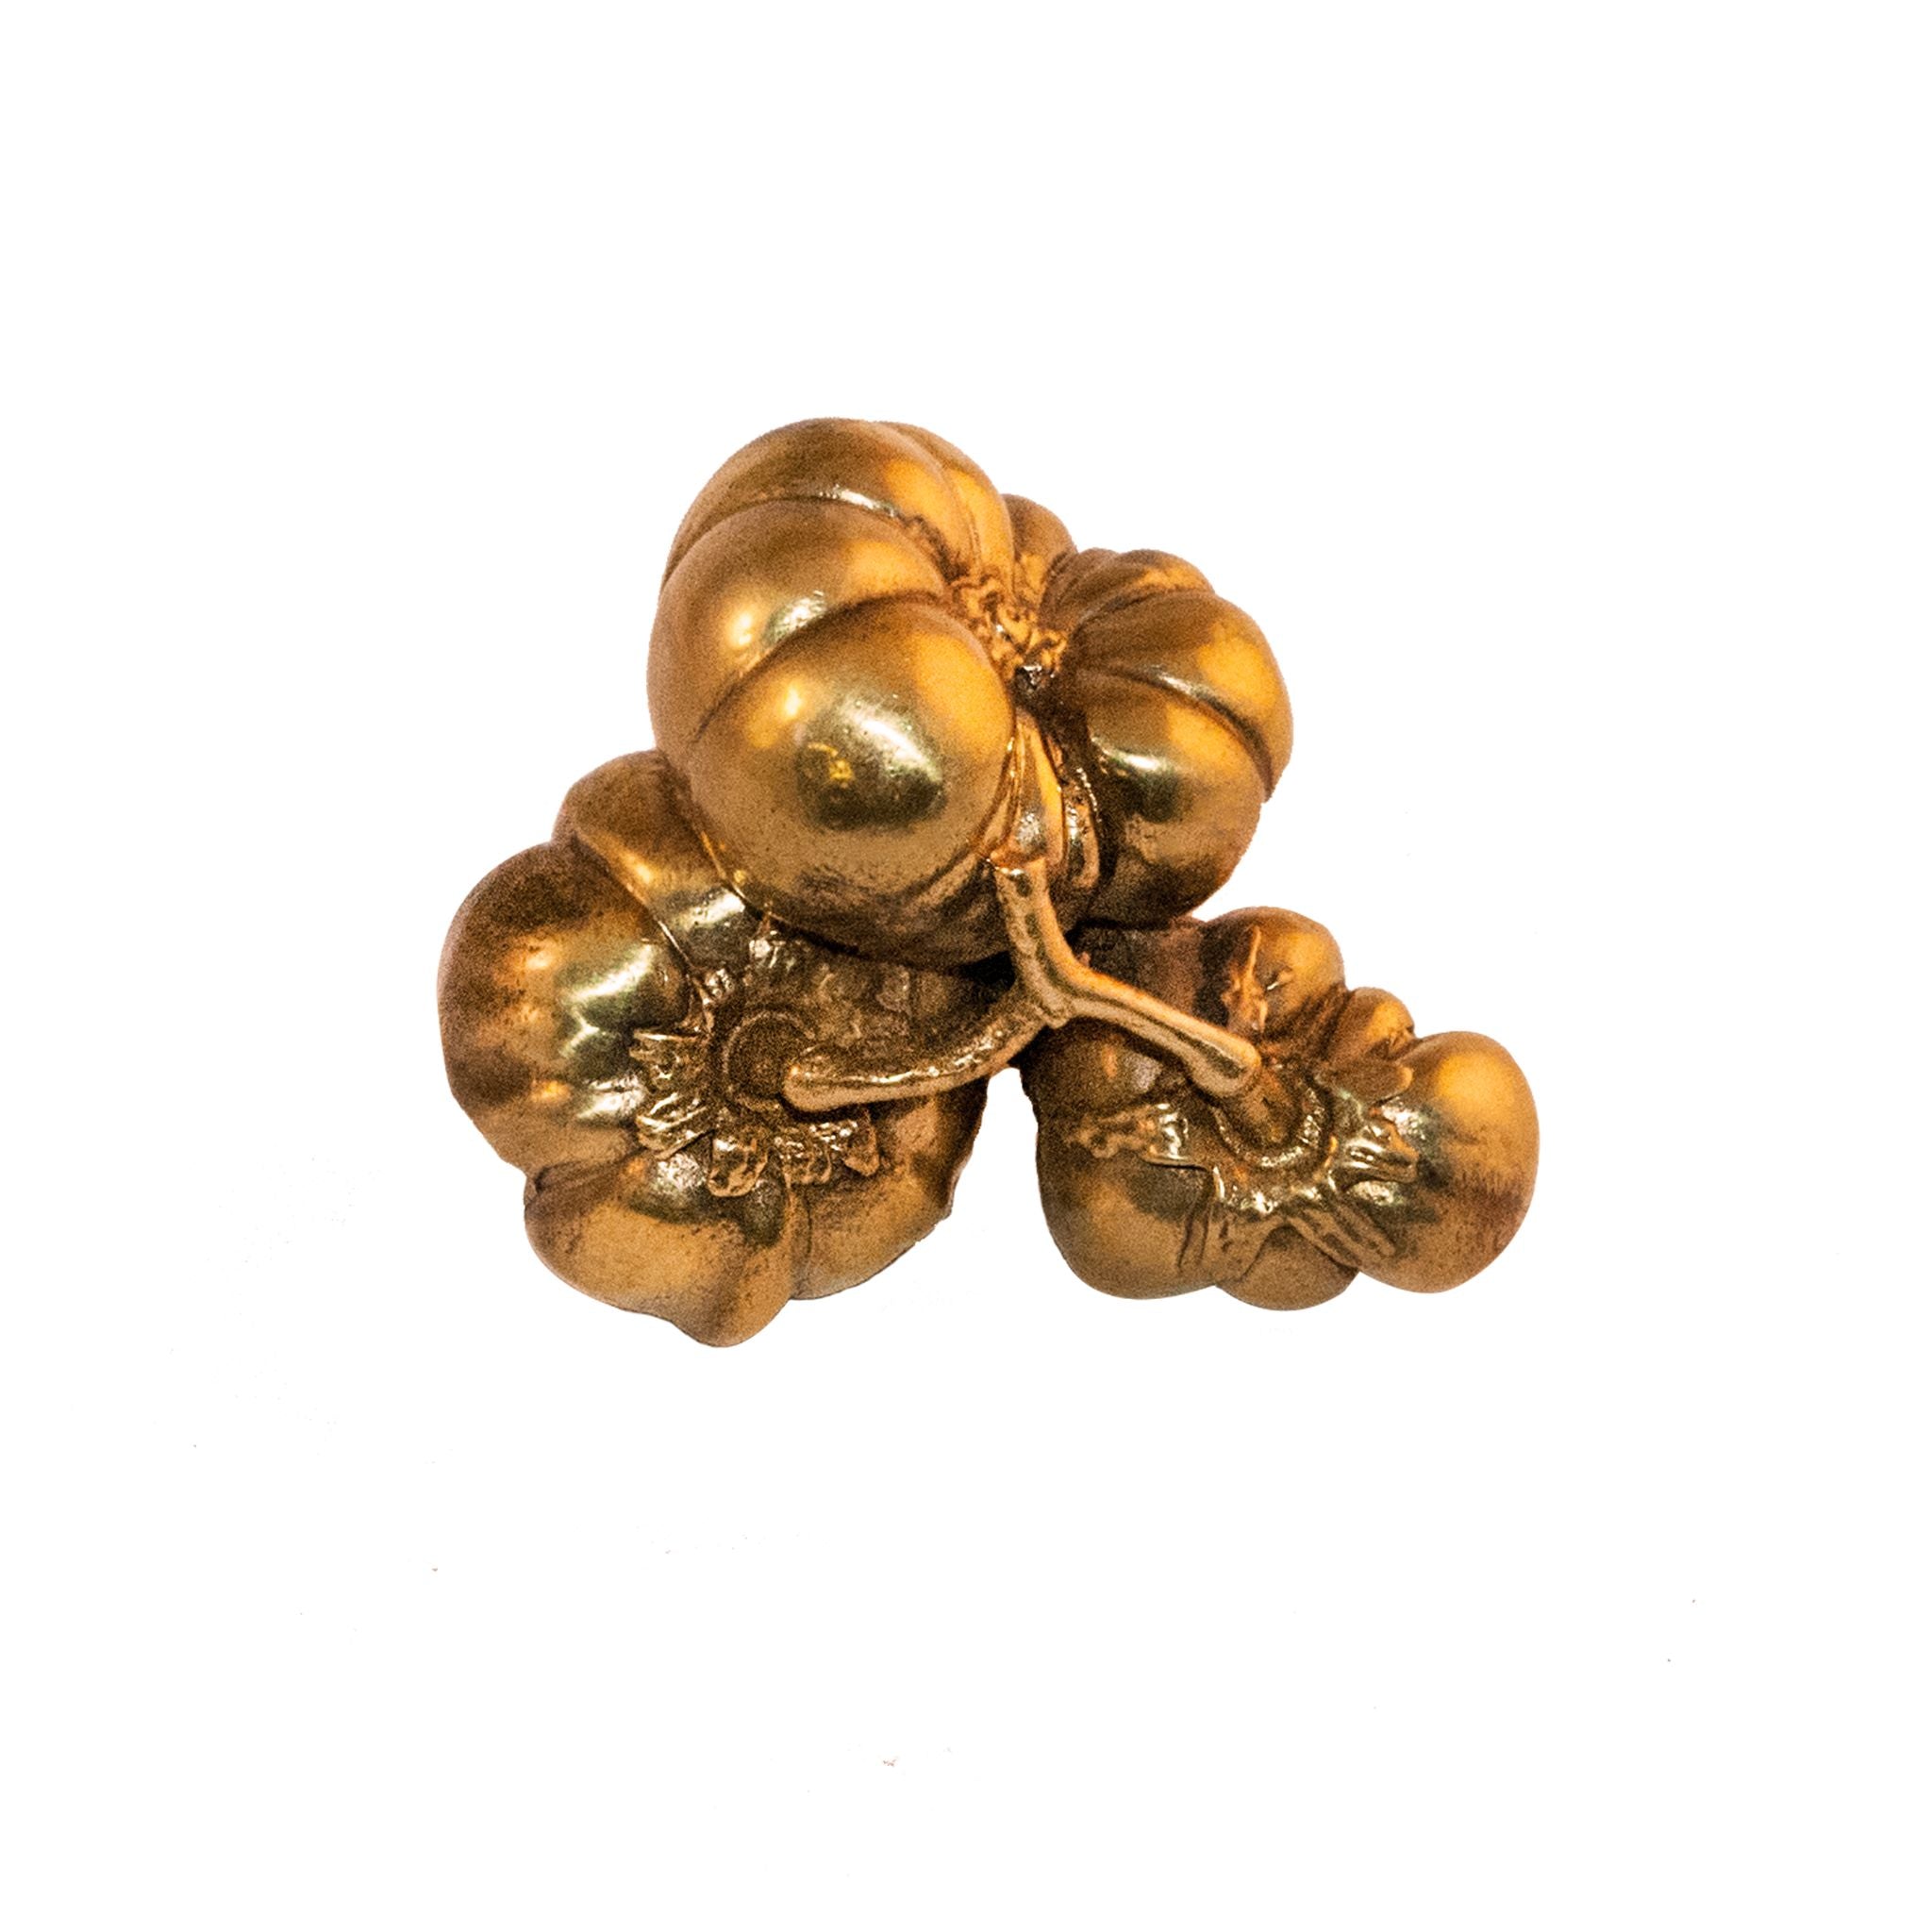 A brass knob shaped like detailed pumpkins, featuring intricate designs.